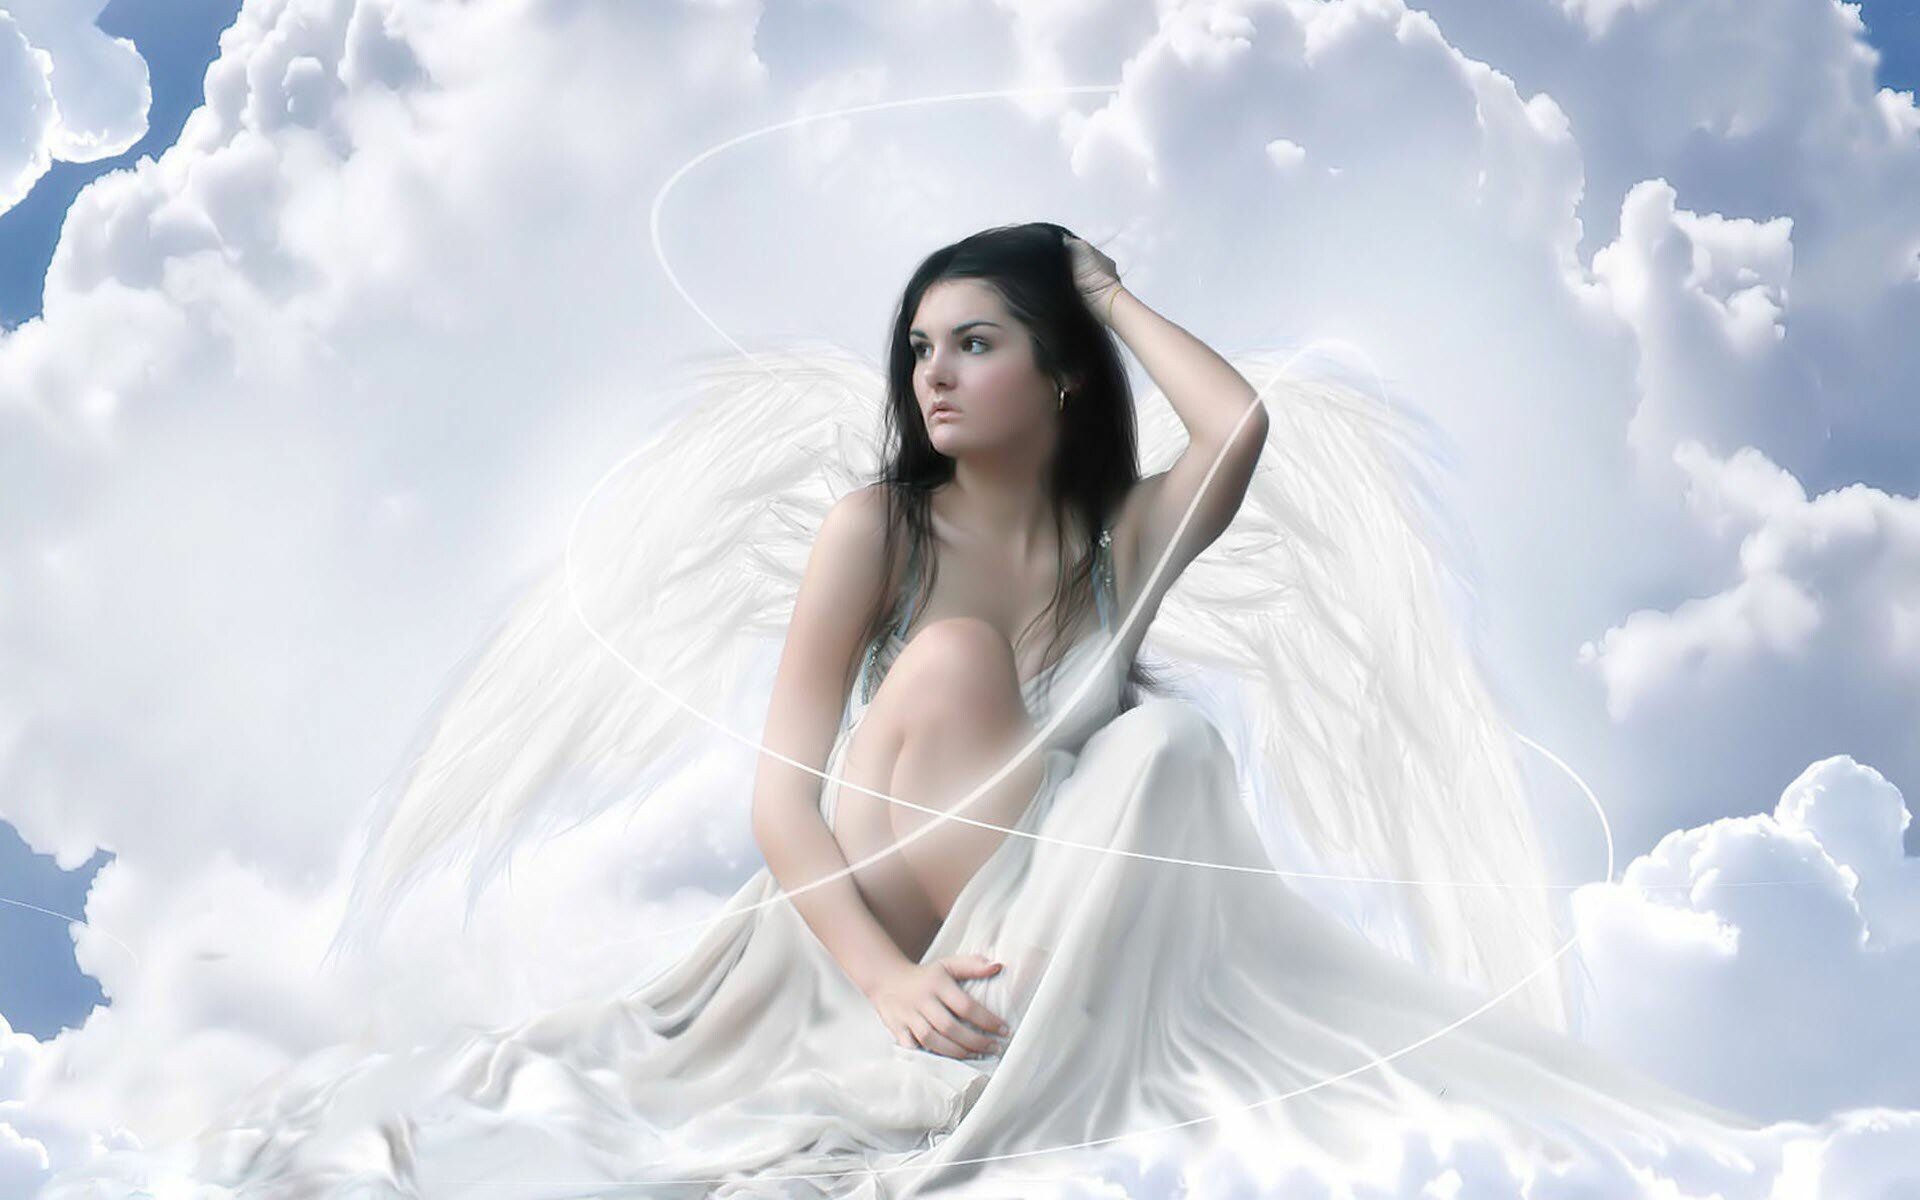 51+ Beautiful Angels Wallpapers: HD, 4K, 5K for PC and Mobile | Download  free images for iPhone, Android